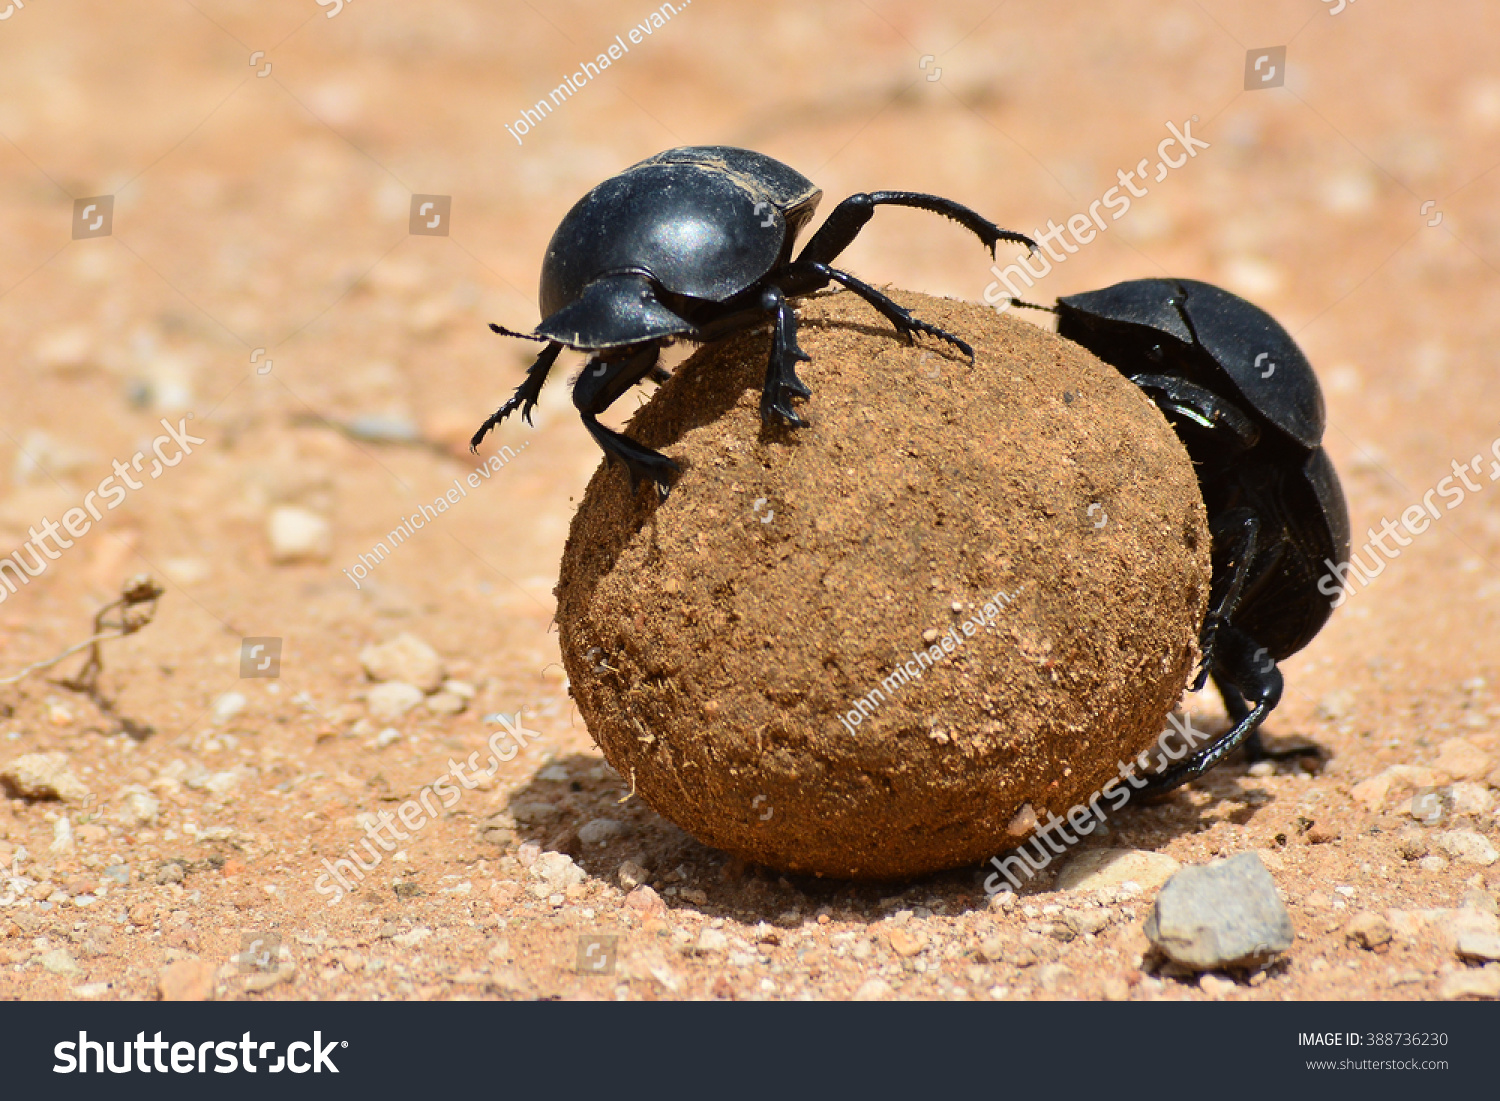 Dung beetle rolling a dung ball #388736230